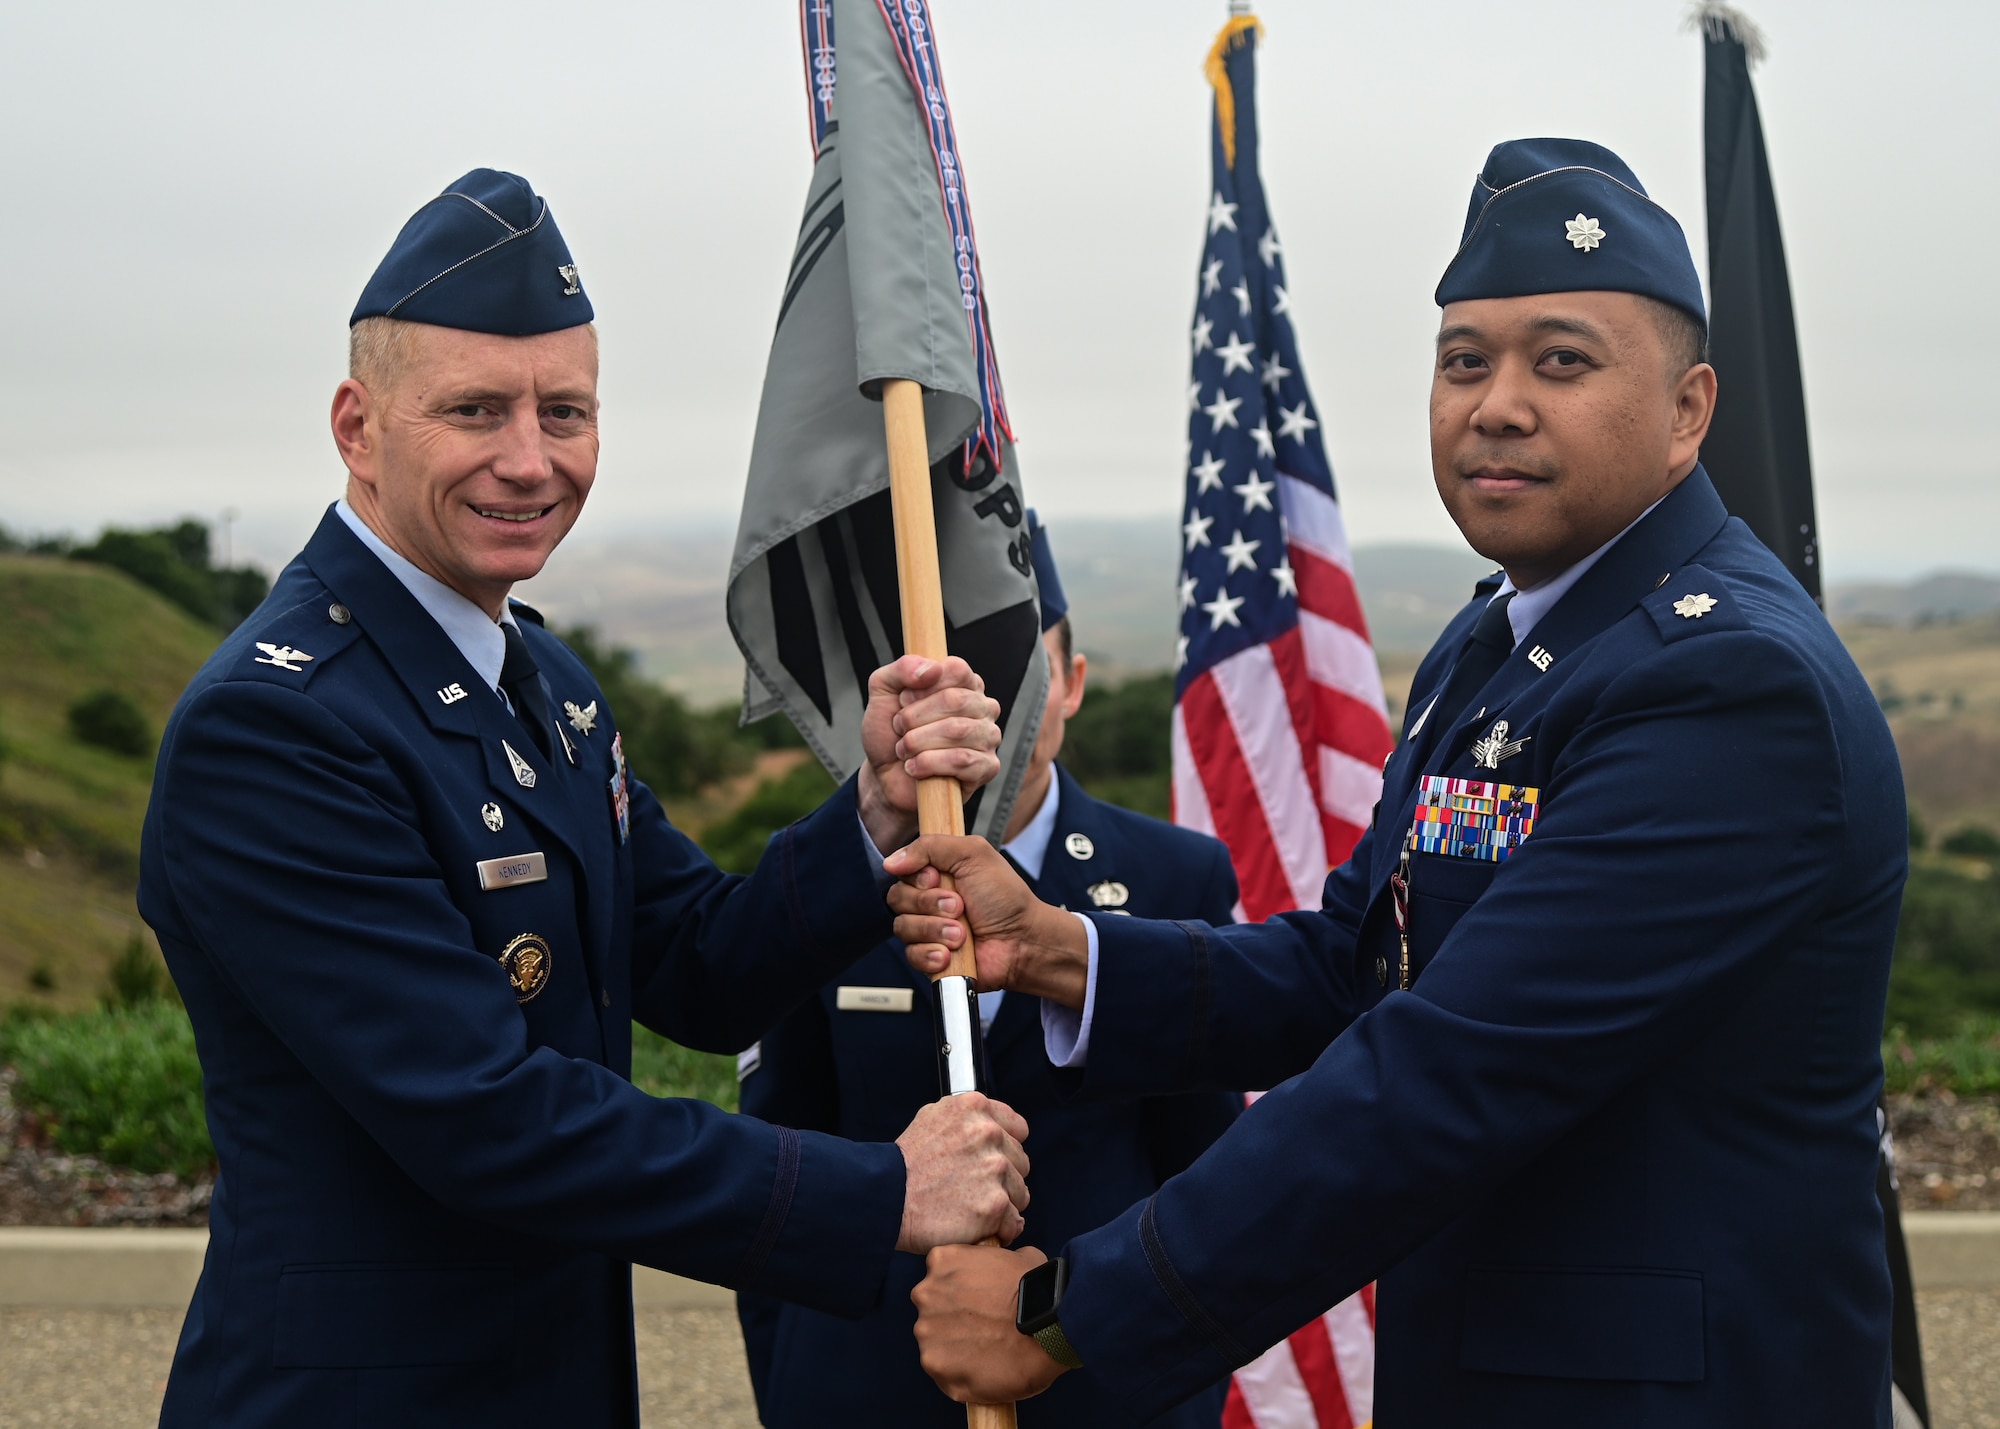 U.S. Space Force Lt. Col. Justin Roque, outgoing 21st Space Operations Squadron commander, passes the 21st SOPS flag to U.S. Space Force Col. Christopher Kennedy, Space Delta 6 commander, during a change of command ceremony on Vandenberg Space Force Base, Calif., June 9, 2023. Roque relinquished his command to U.S. Space Force Lt. Col. Matthew Knepper. (U.S. Space Force Photo by Airman 1st Class Ryan Quijas)